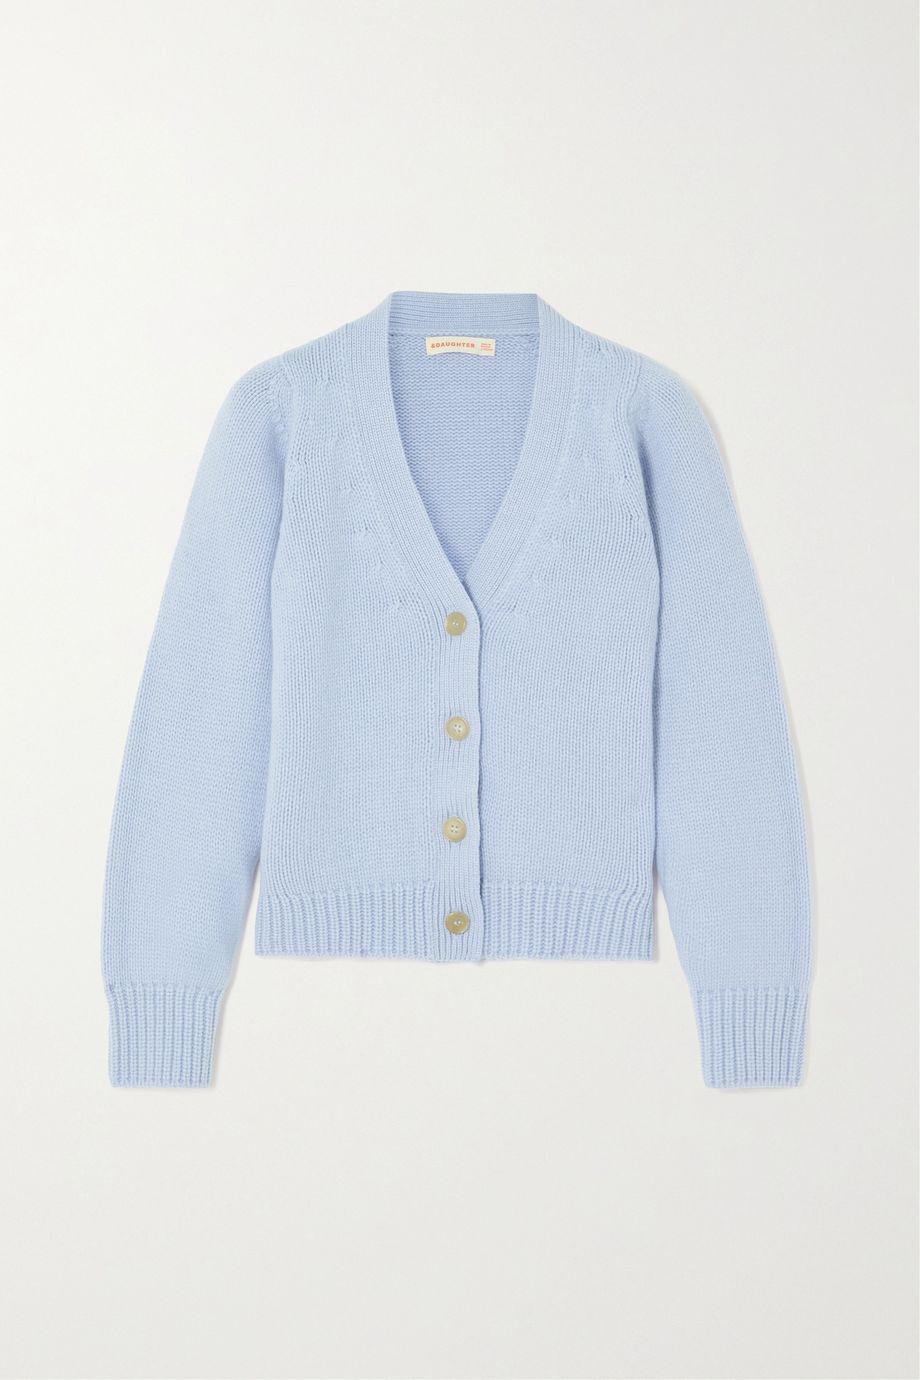 Shea merino wool and cashmere-blend cardigan by &DAUGHTER